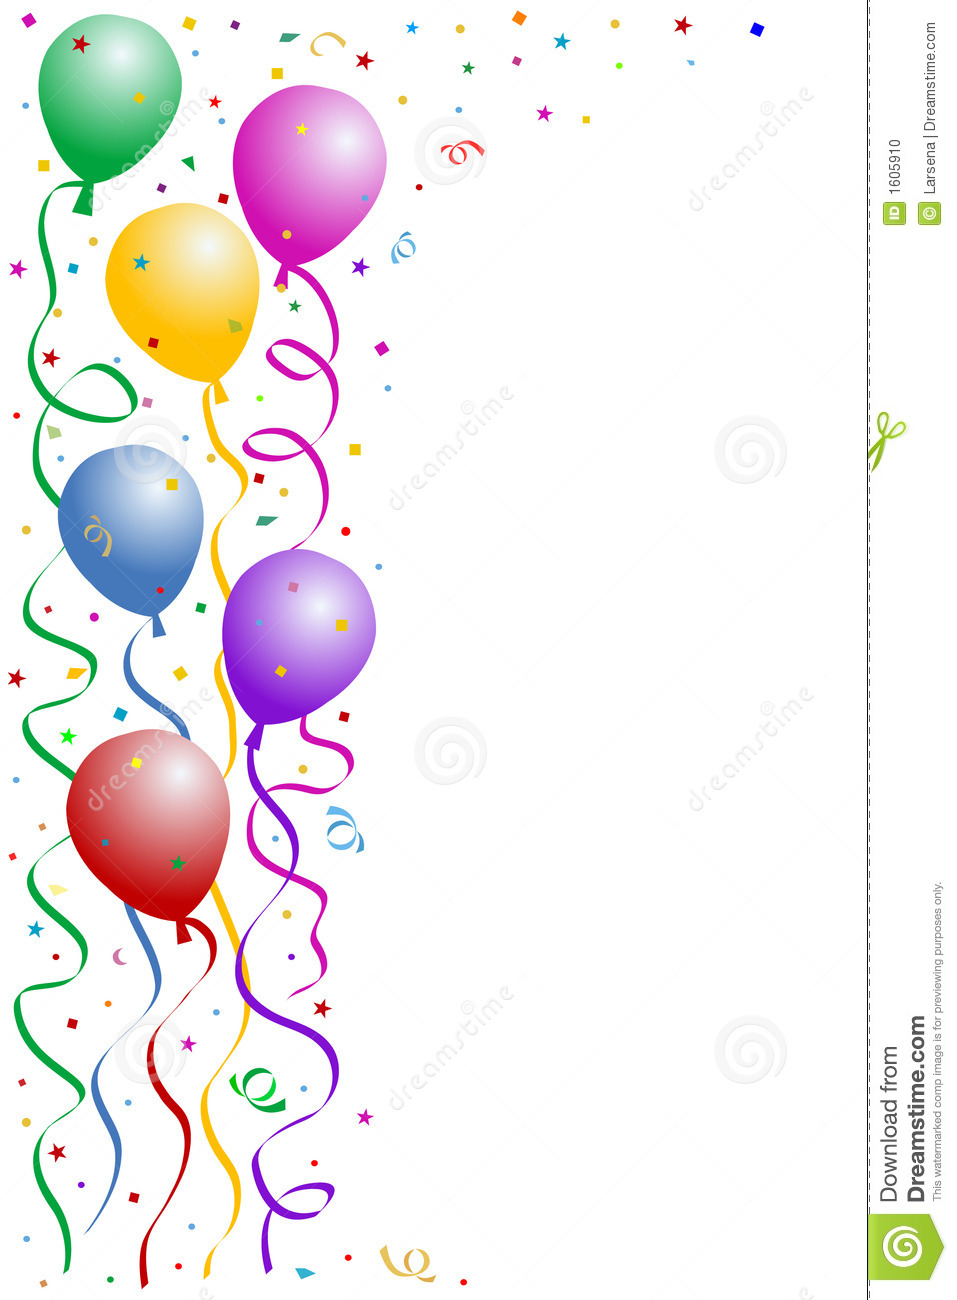 Party Balloons And Confetti   Clipart Panda   Free Clipart Images